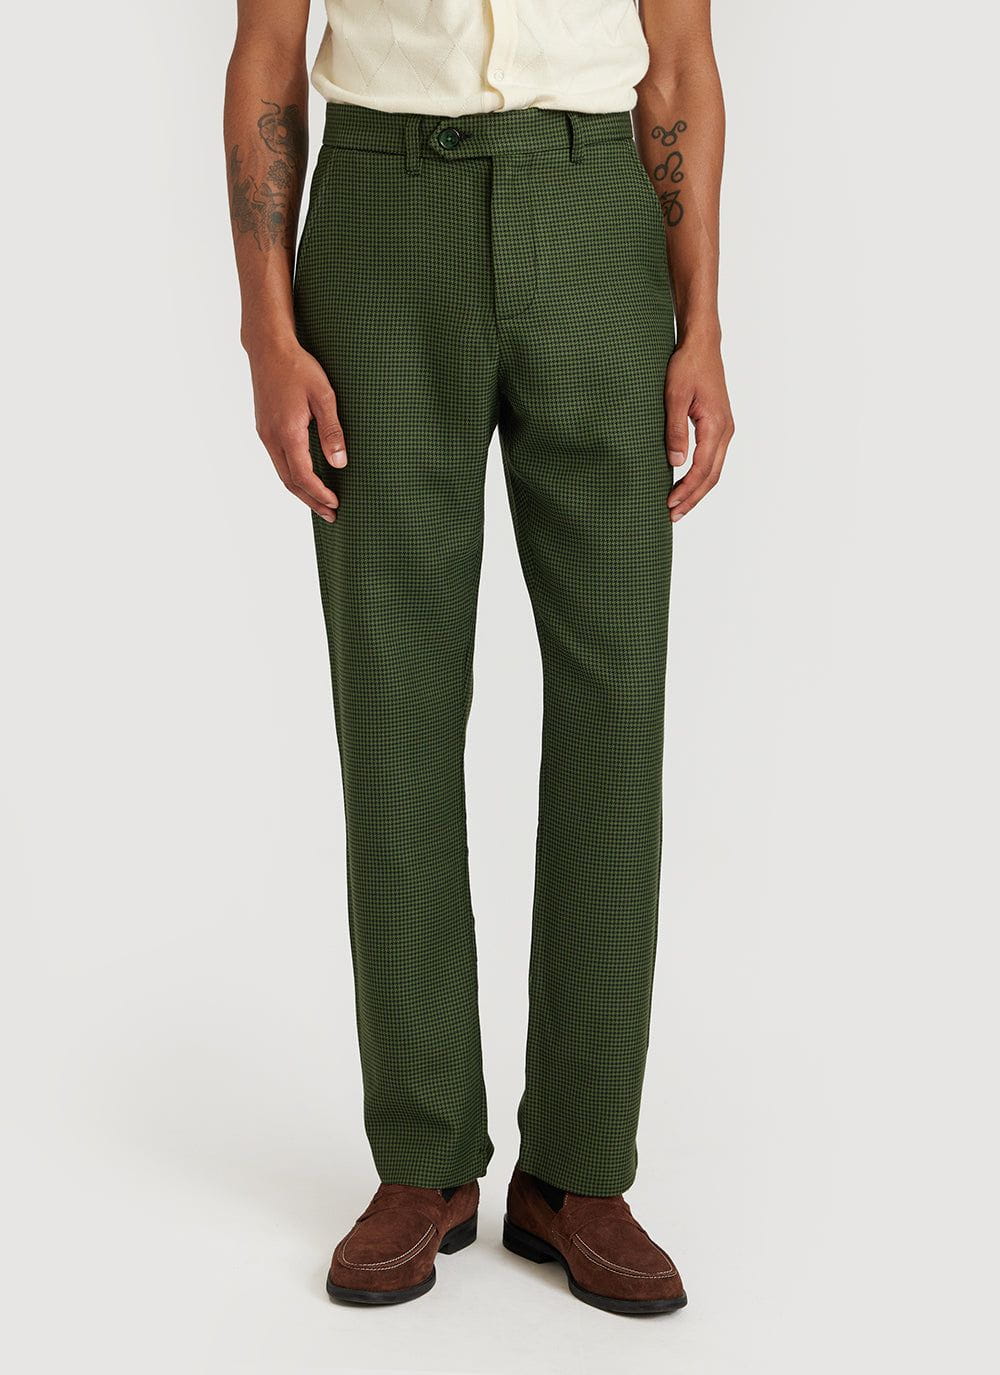 Men's Tailored Trousers, Wool, Houndstooth, Forest Green